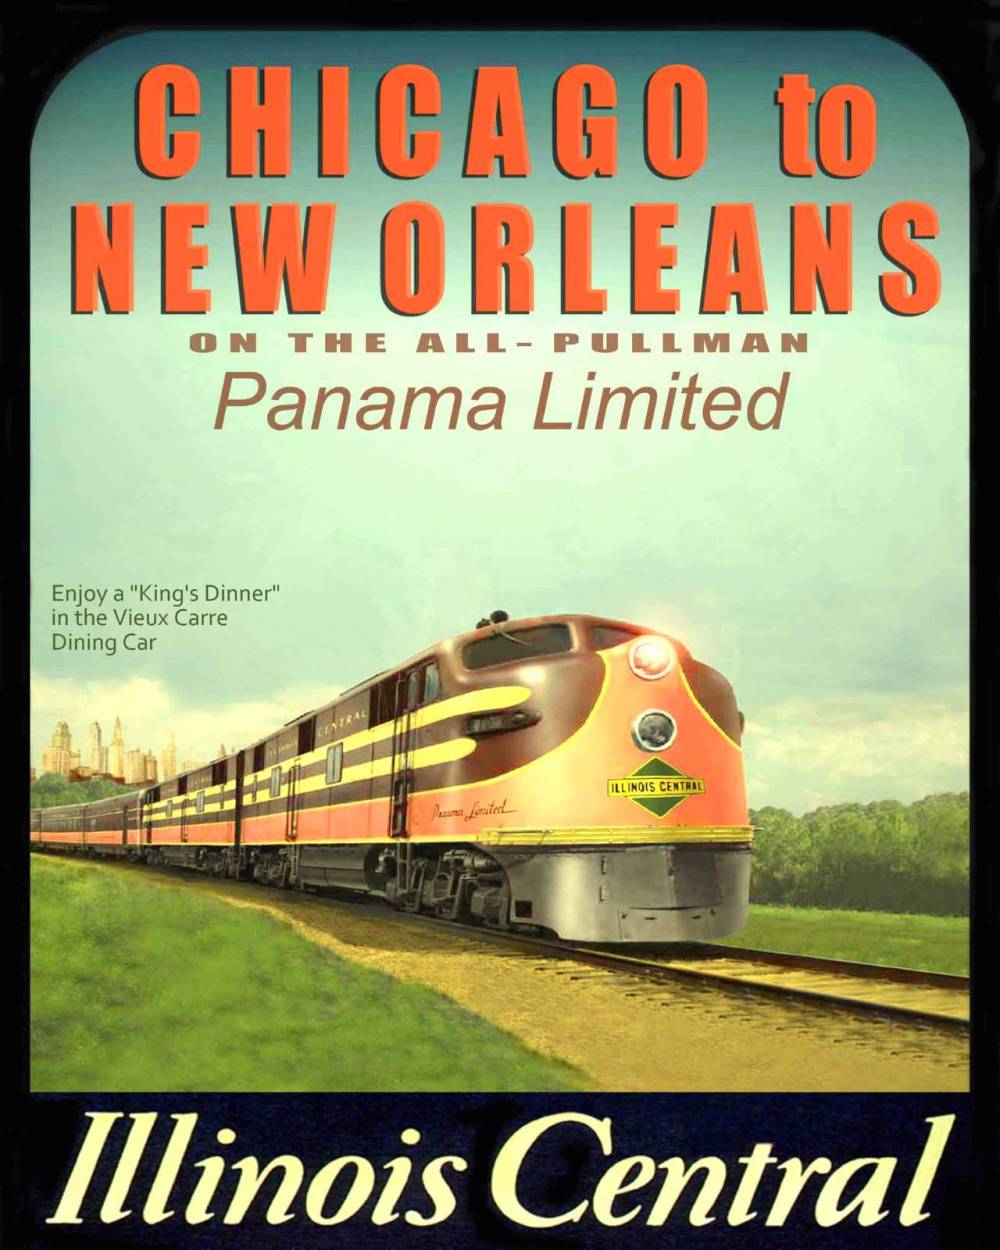 POSTER - CHICAGO - TRAIN - ILLINOIS CENTRAL - PANAMA LIMITED - VIEUX CARRE DINING CAR